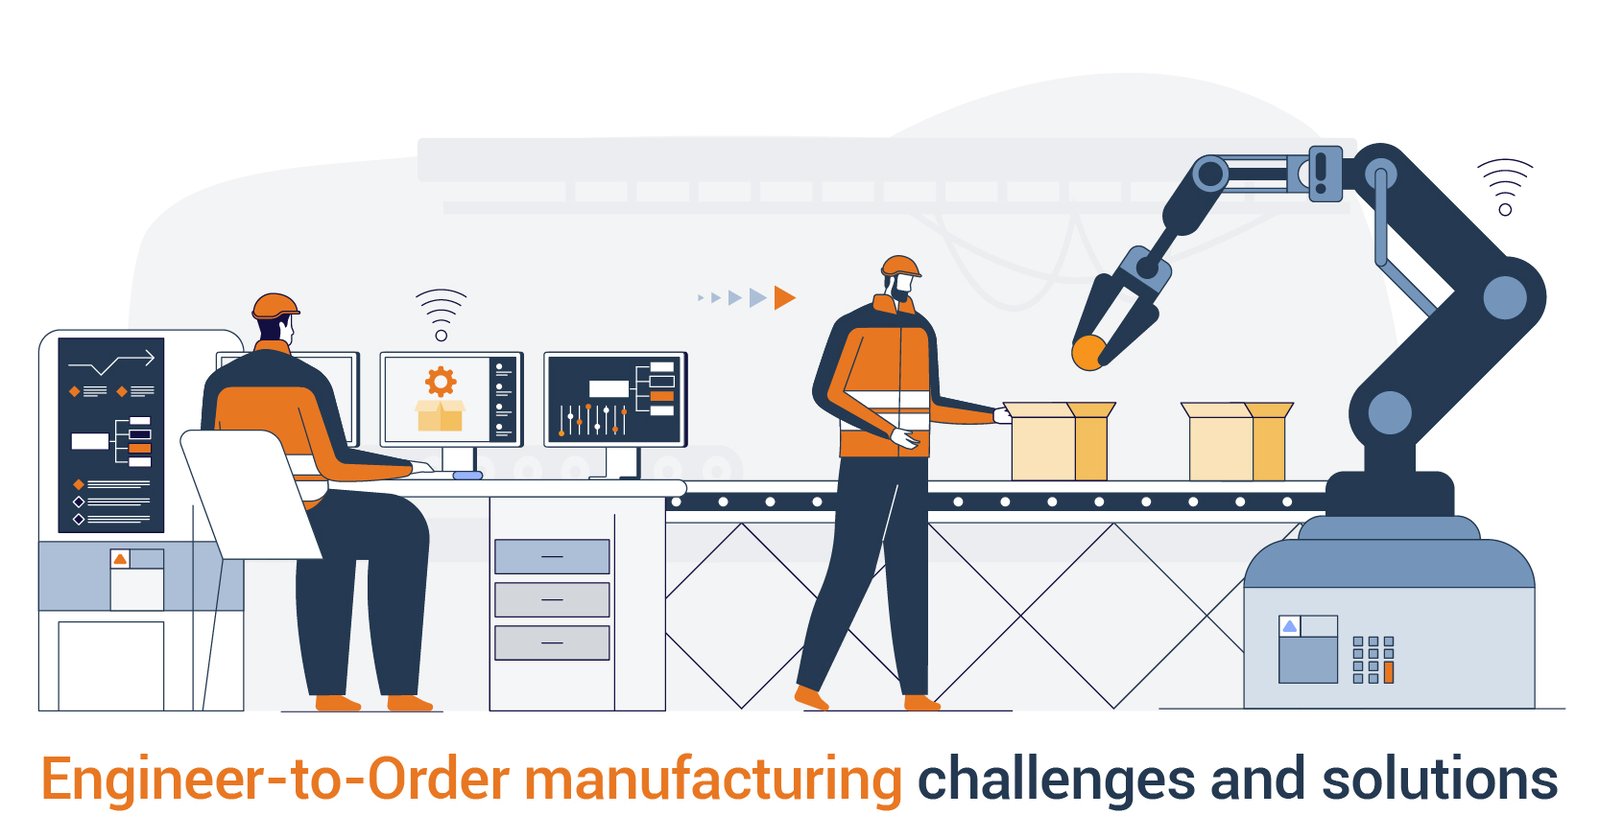 PLM-ERP integration for addressing the challenges of Engineer-to-Order manufacturers